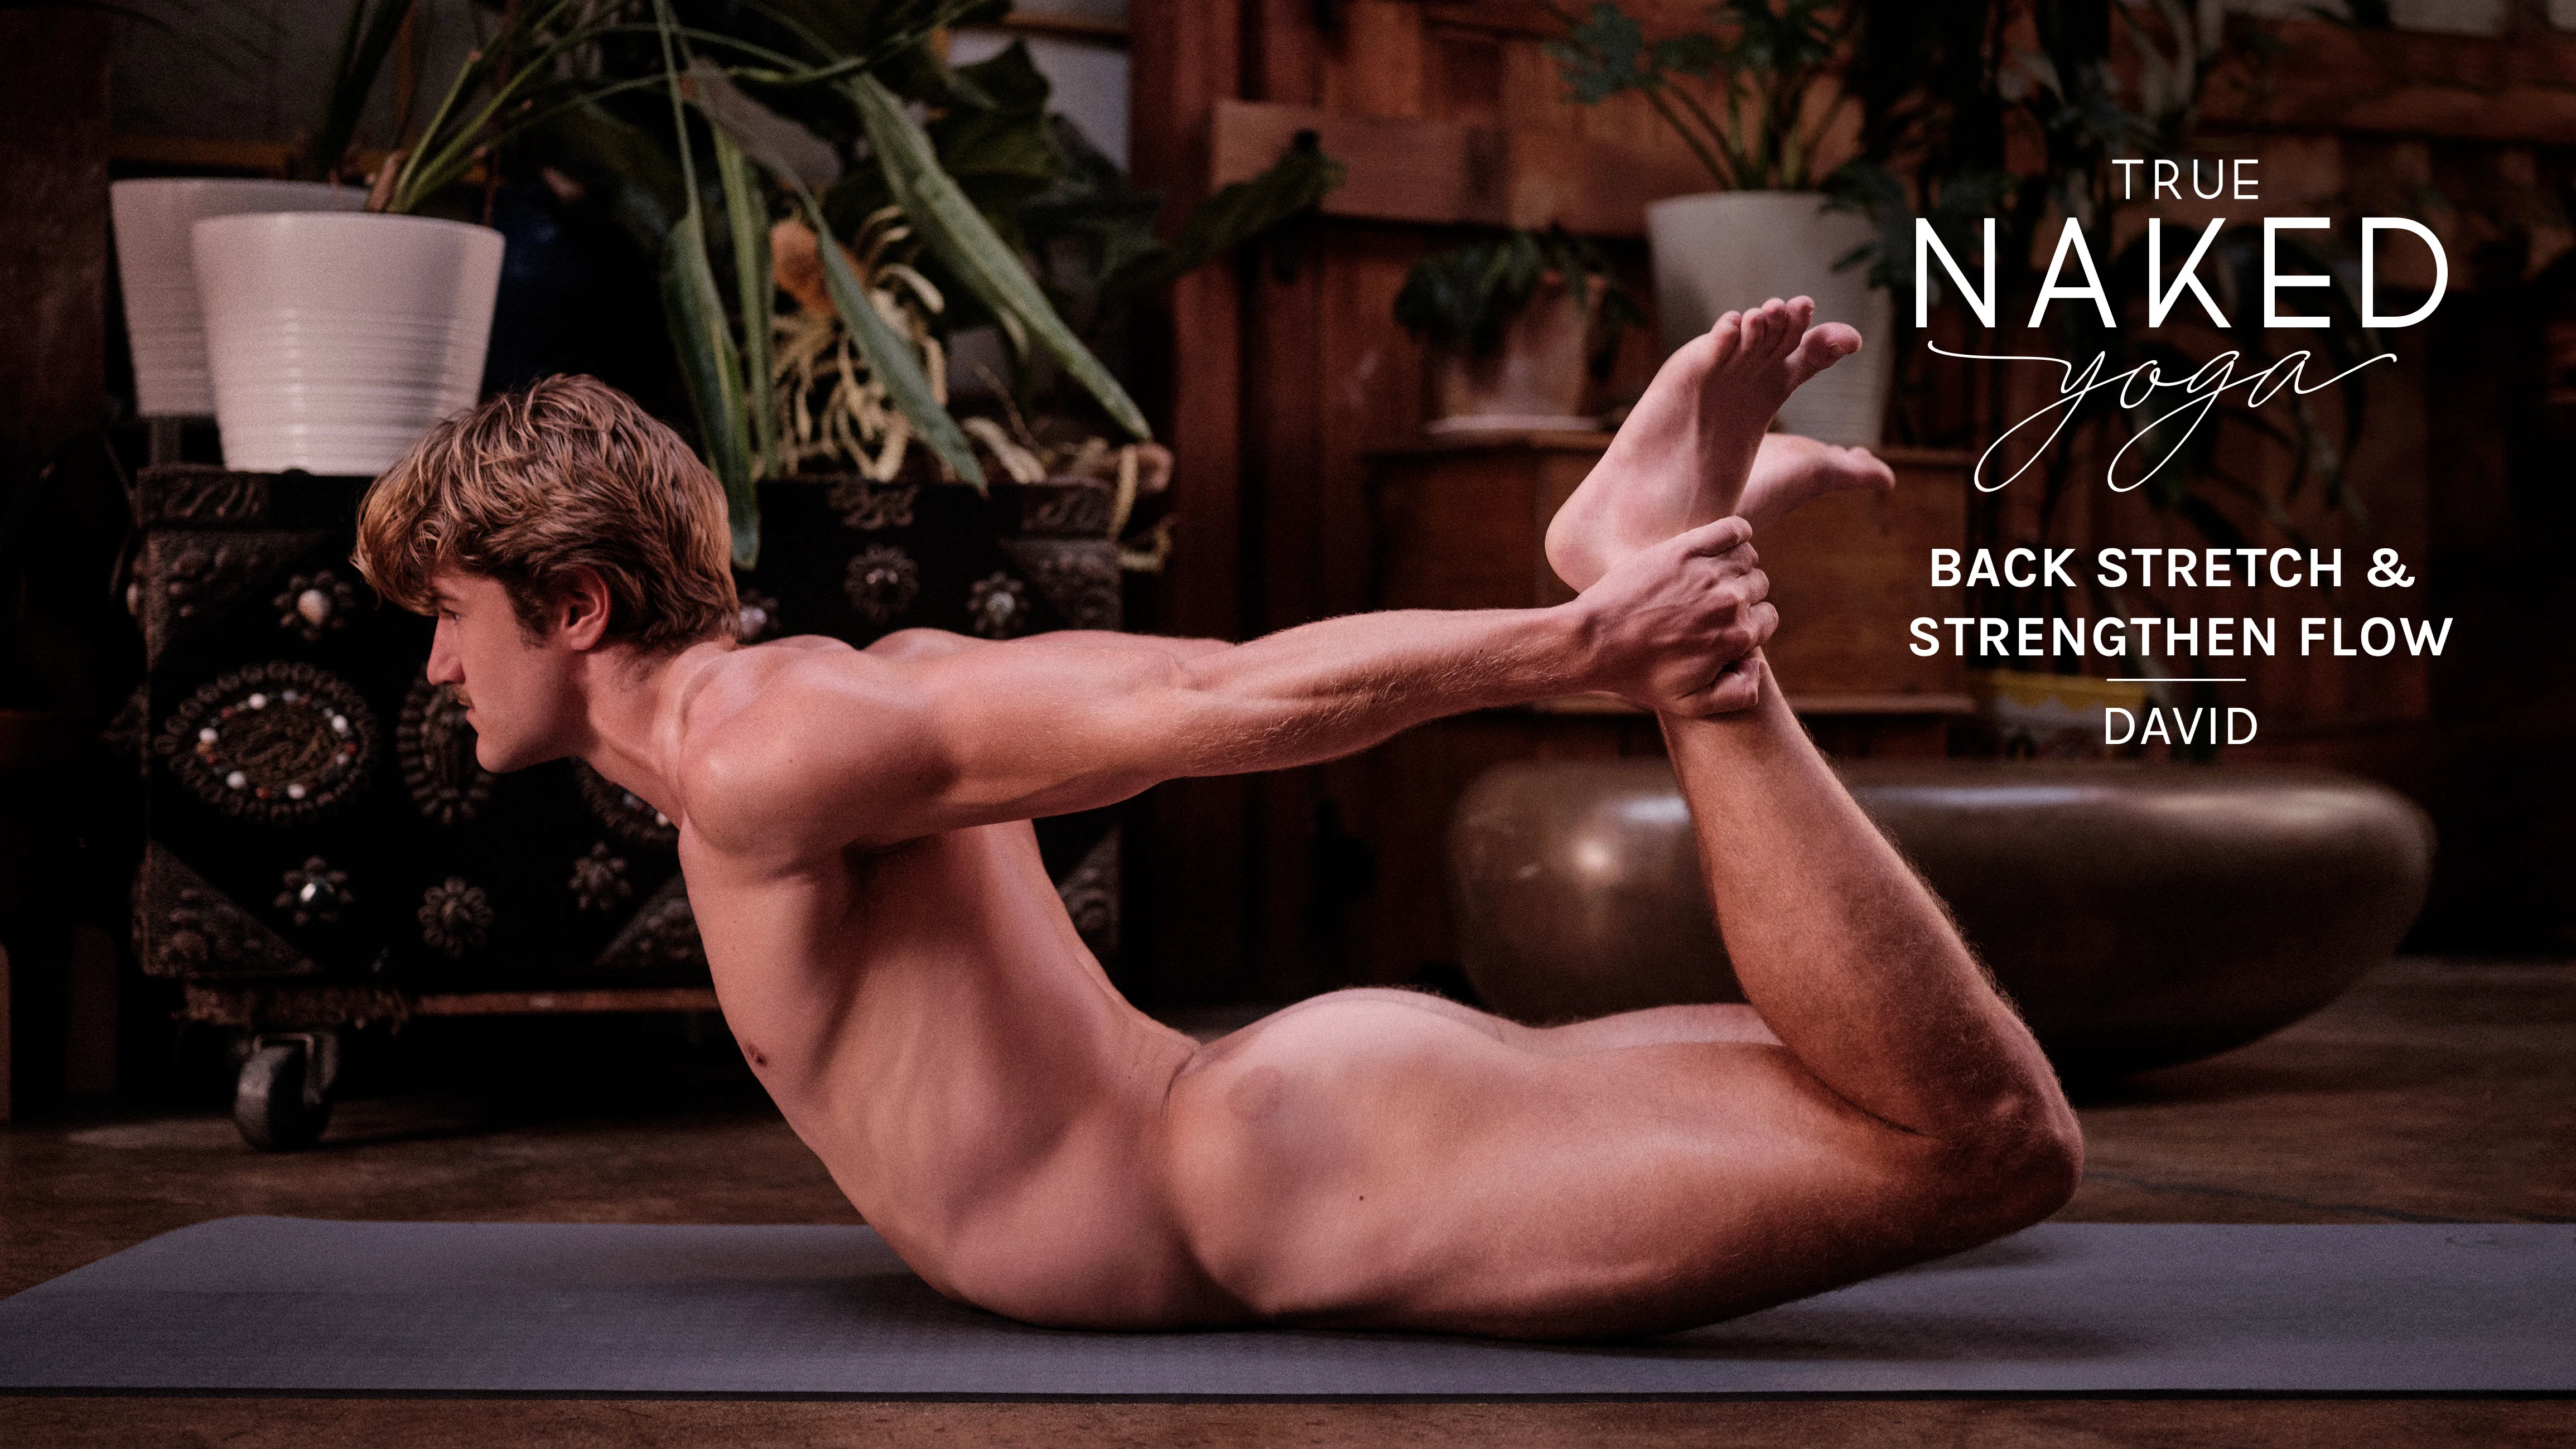 Watch True Naked Yoga – Back Stretch & Strengthen Flow with David Online